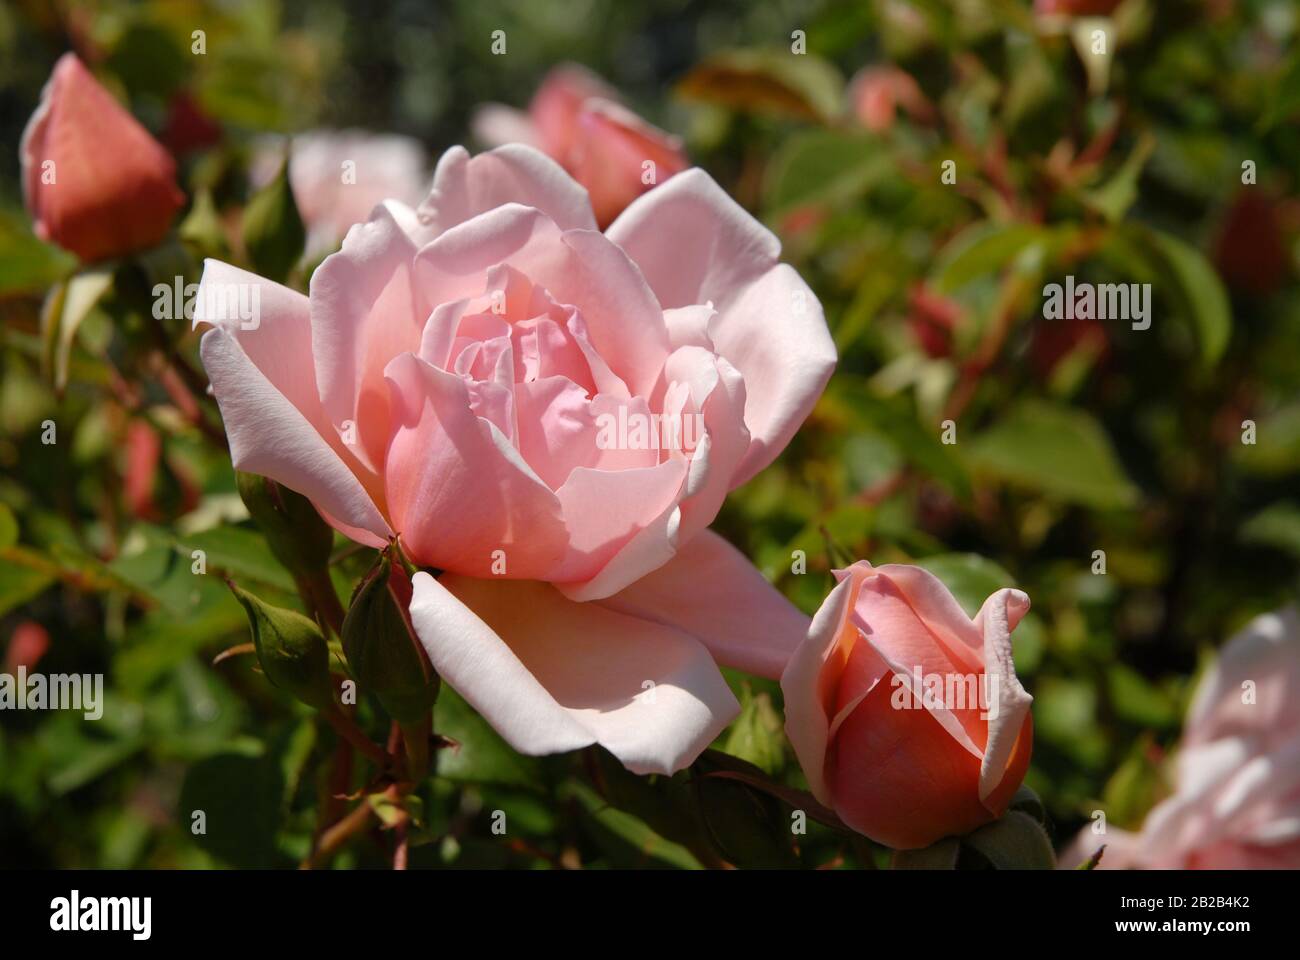 Pink rambler rose, Albertine, with flower and buds Stock Photo